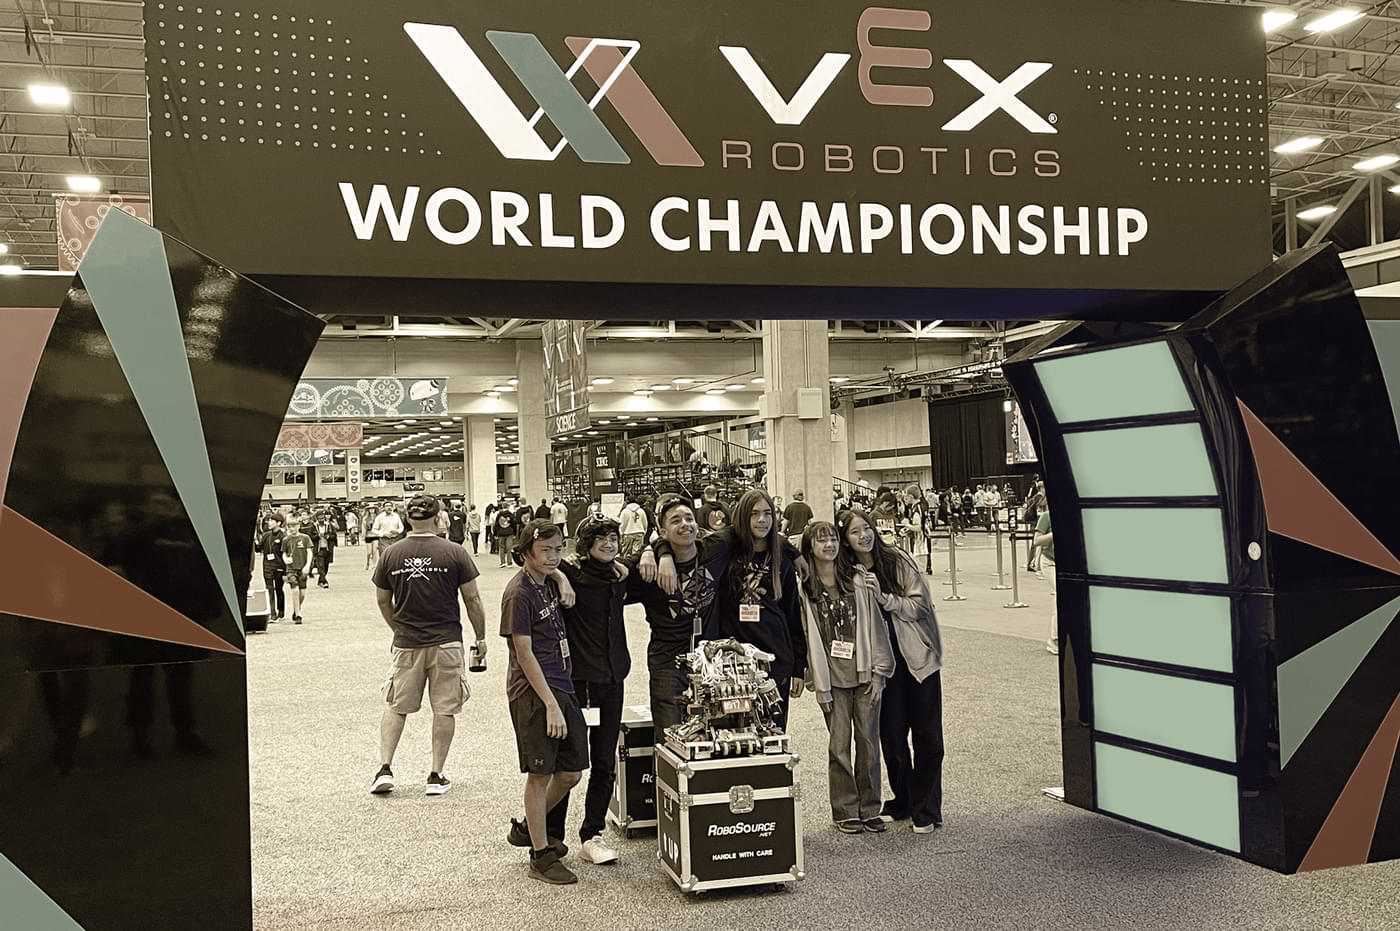 Student members of the Sweetwater Union High School District VEX Robotics League Program take a group photo at the entrance of the VEX Robotics World Championship